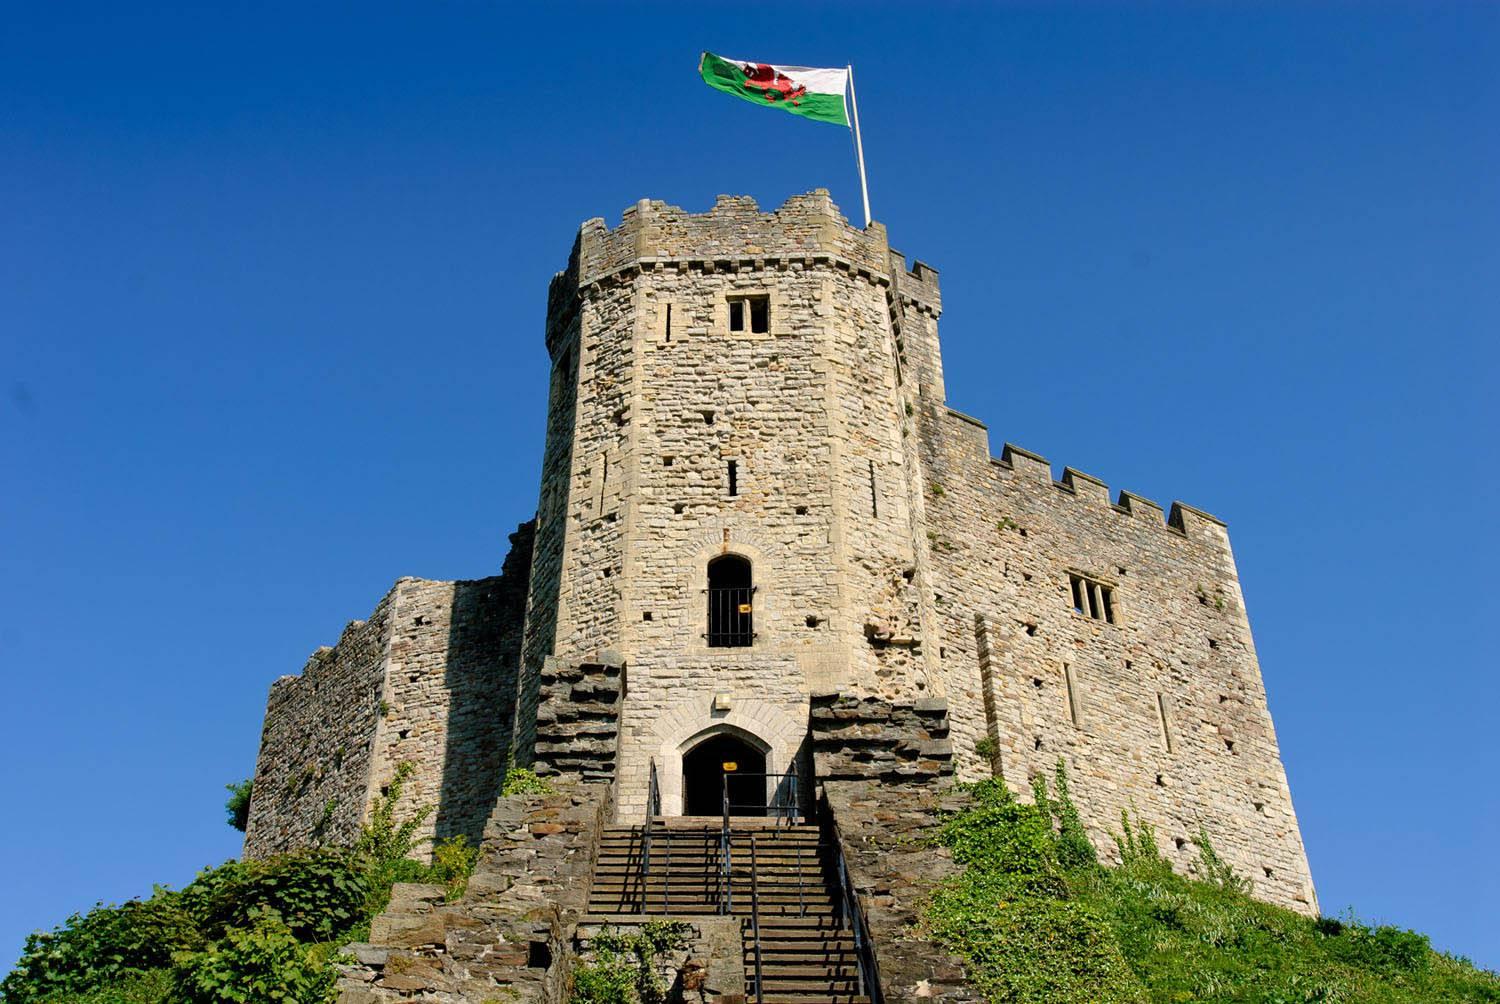 Cover image of this place Cardiff Castle / Castell Caerdydd